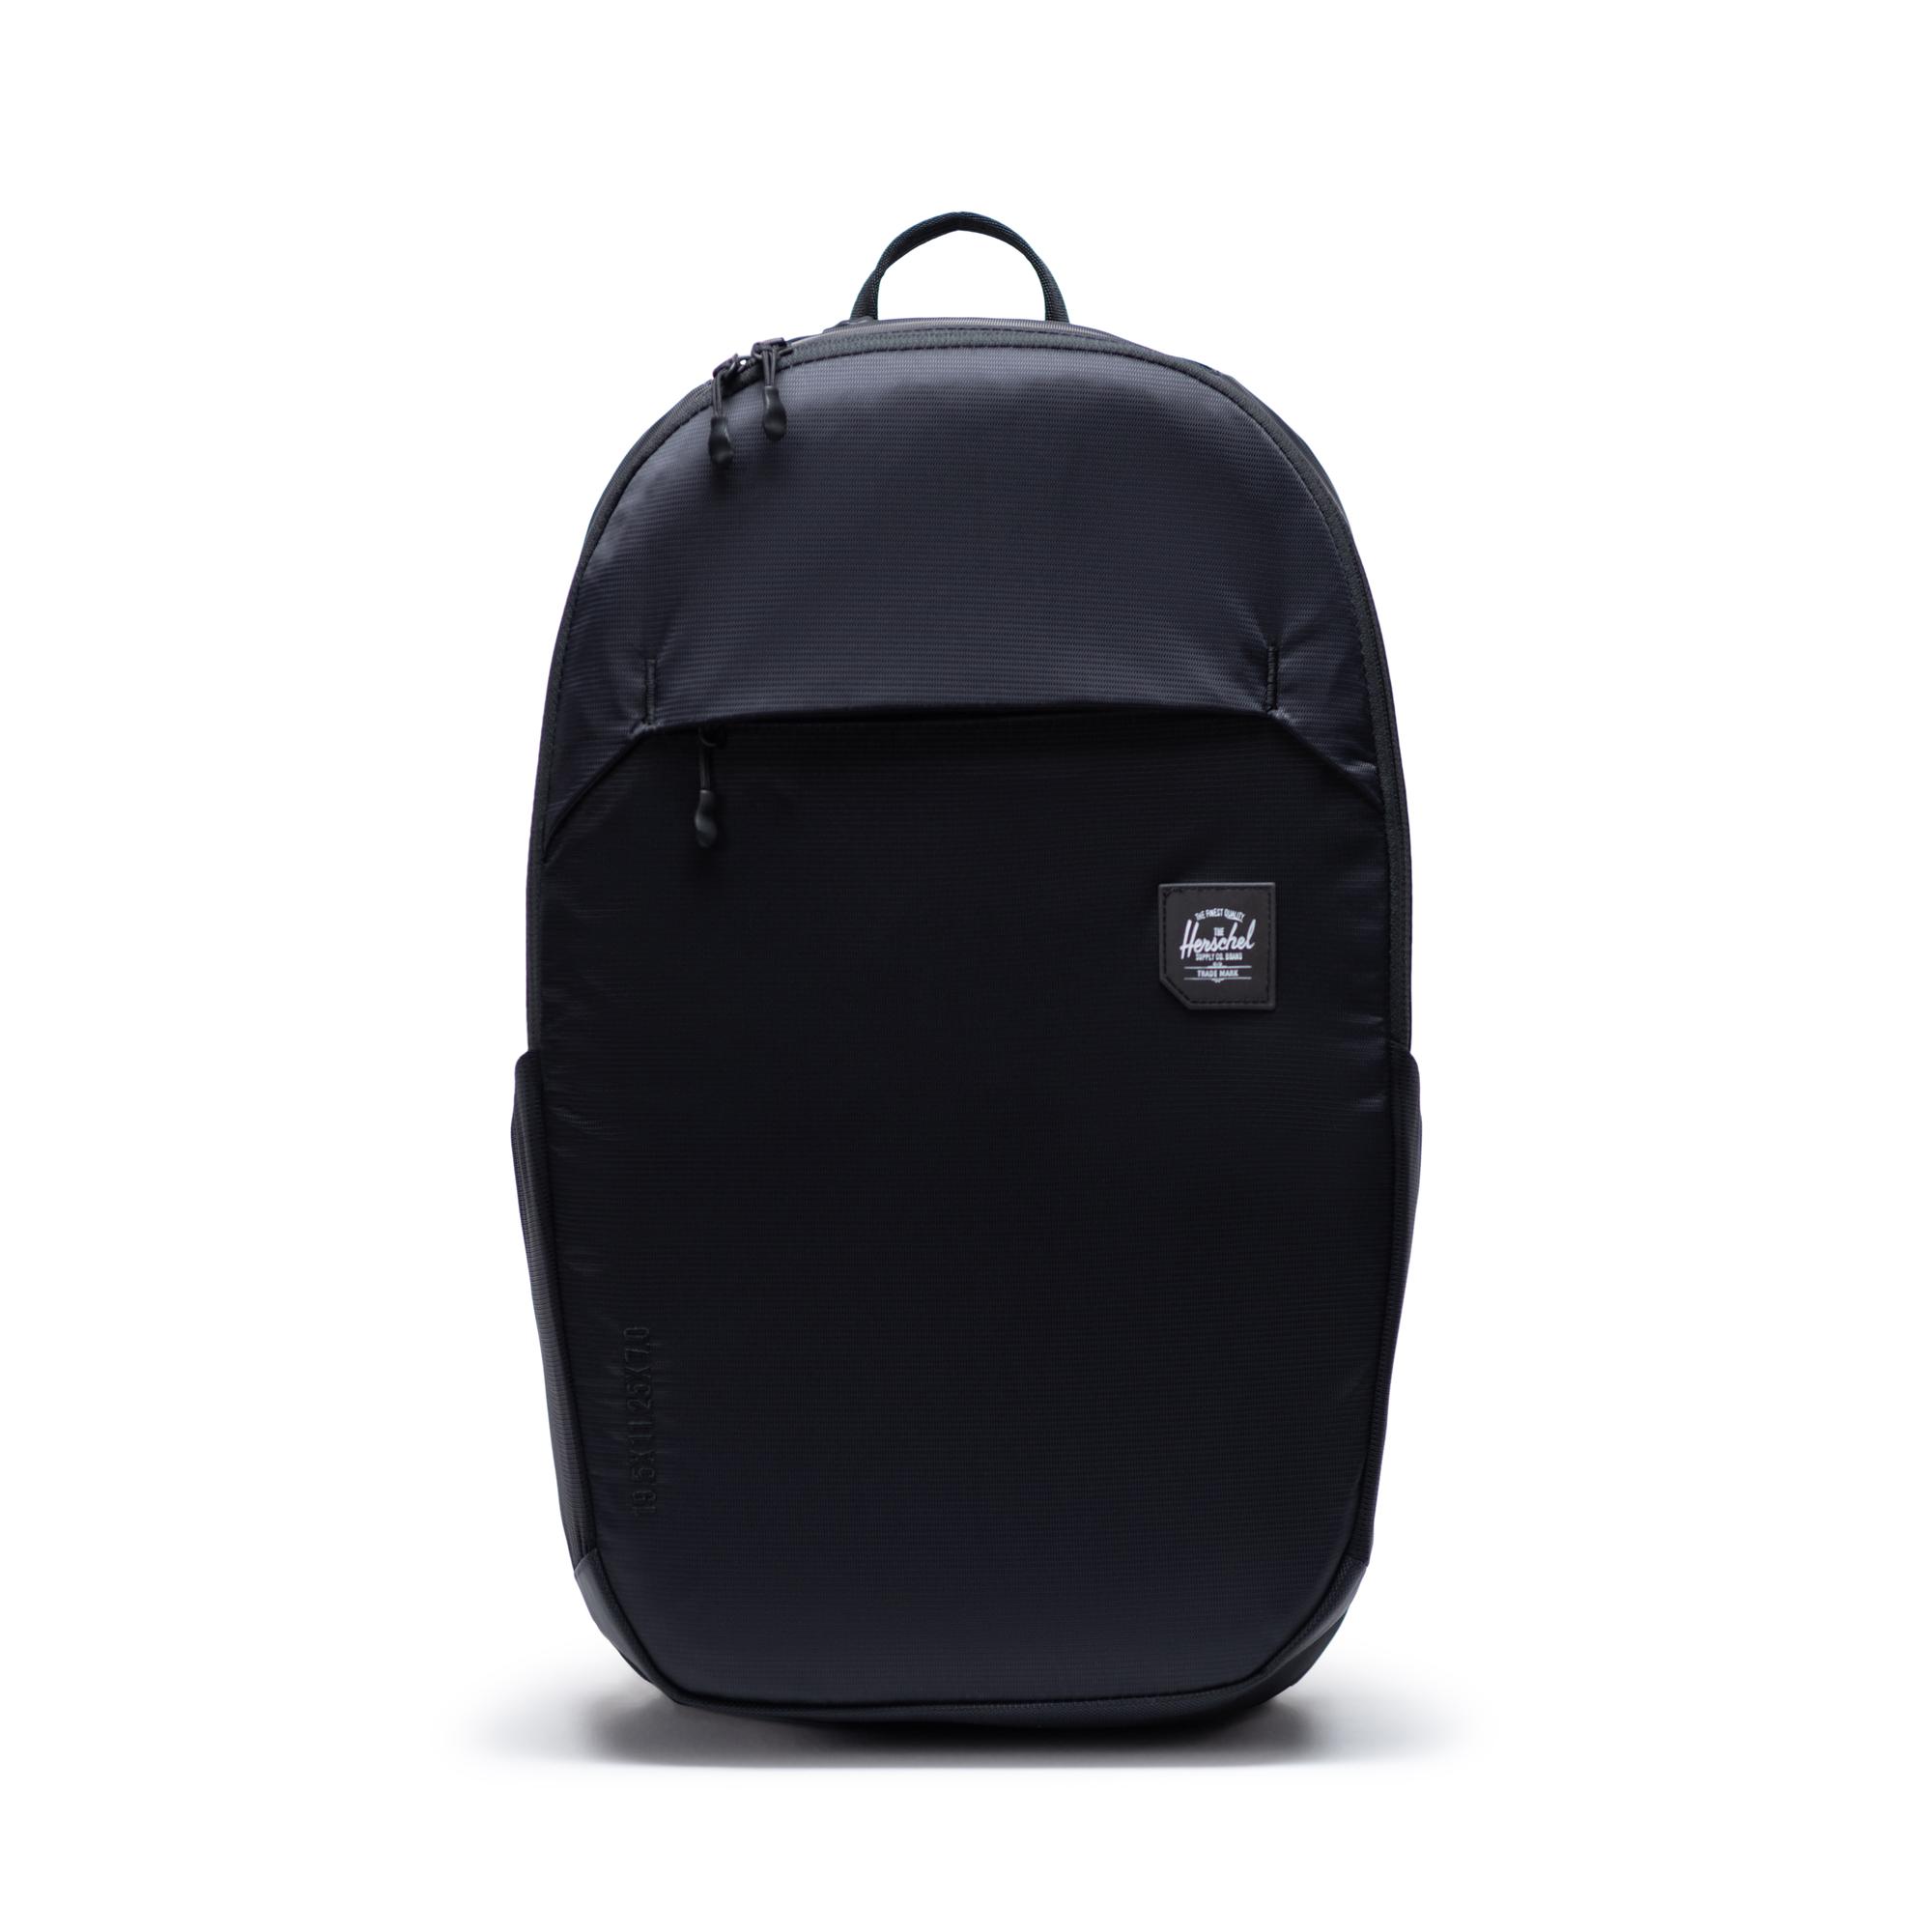 Mammoth Backpack Large | Herschel Supply Company